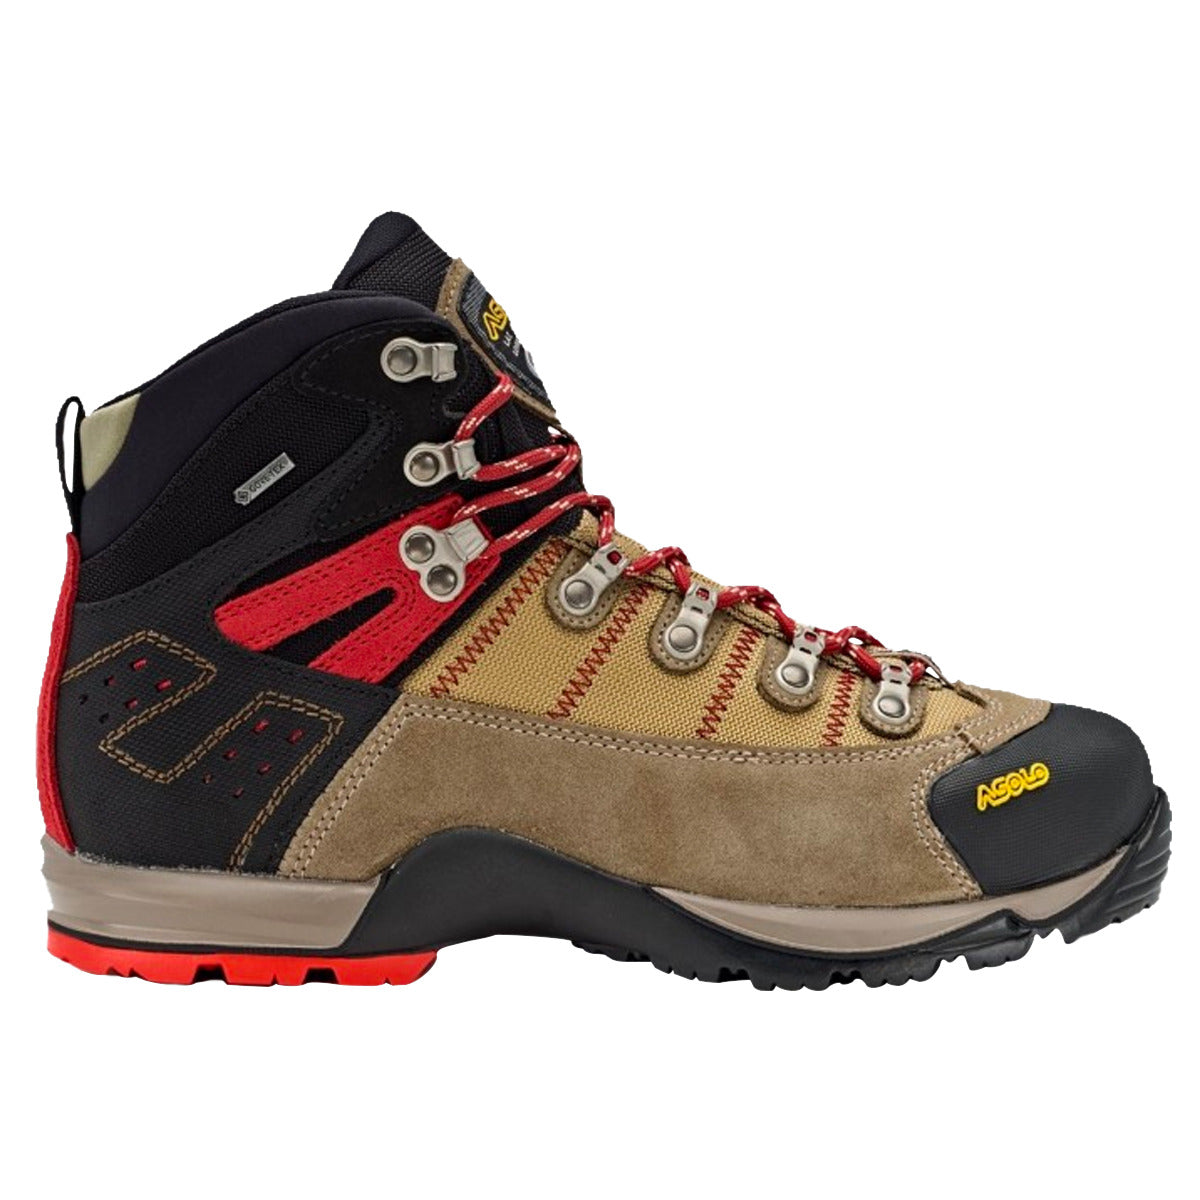 Asolo Fugitive GTX in  by GOHUNT | Asolo - GOHUNT Shop